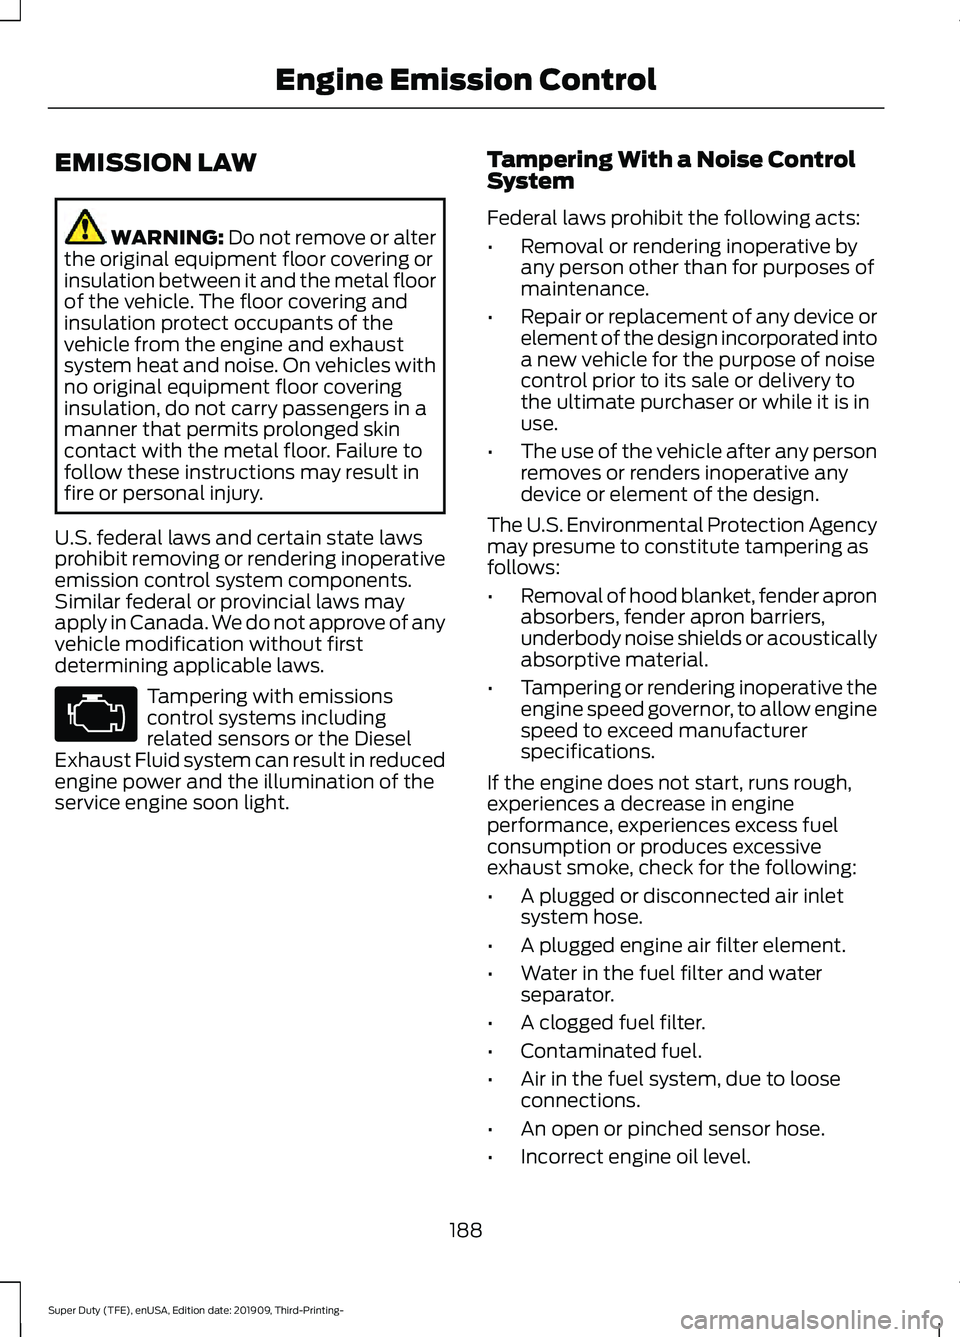 FORD F-250 2020  Owners Manual EMISSION LAW
WARNING: Do not remove or alter
the original equipment floor covering or
insulation between it and the metal floor
of the vehicle. The floor covering and
insulation protect occupants of t